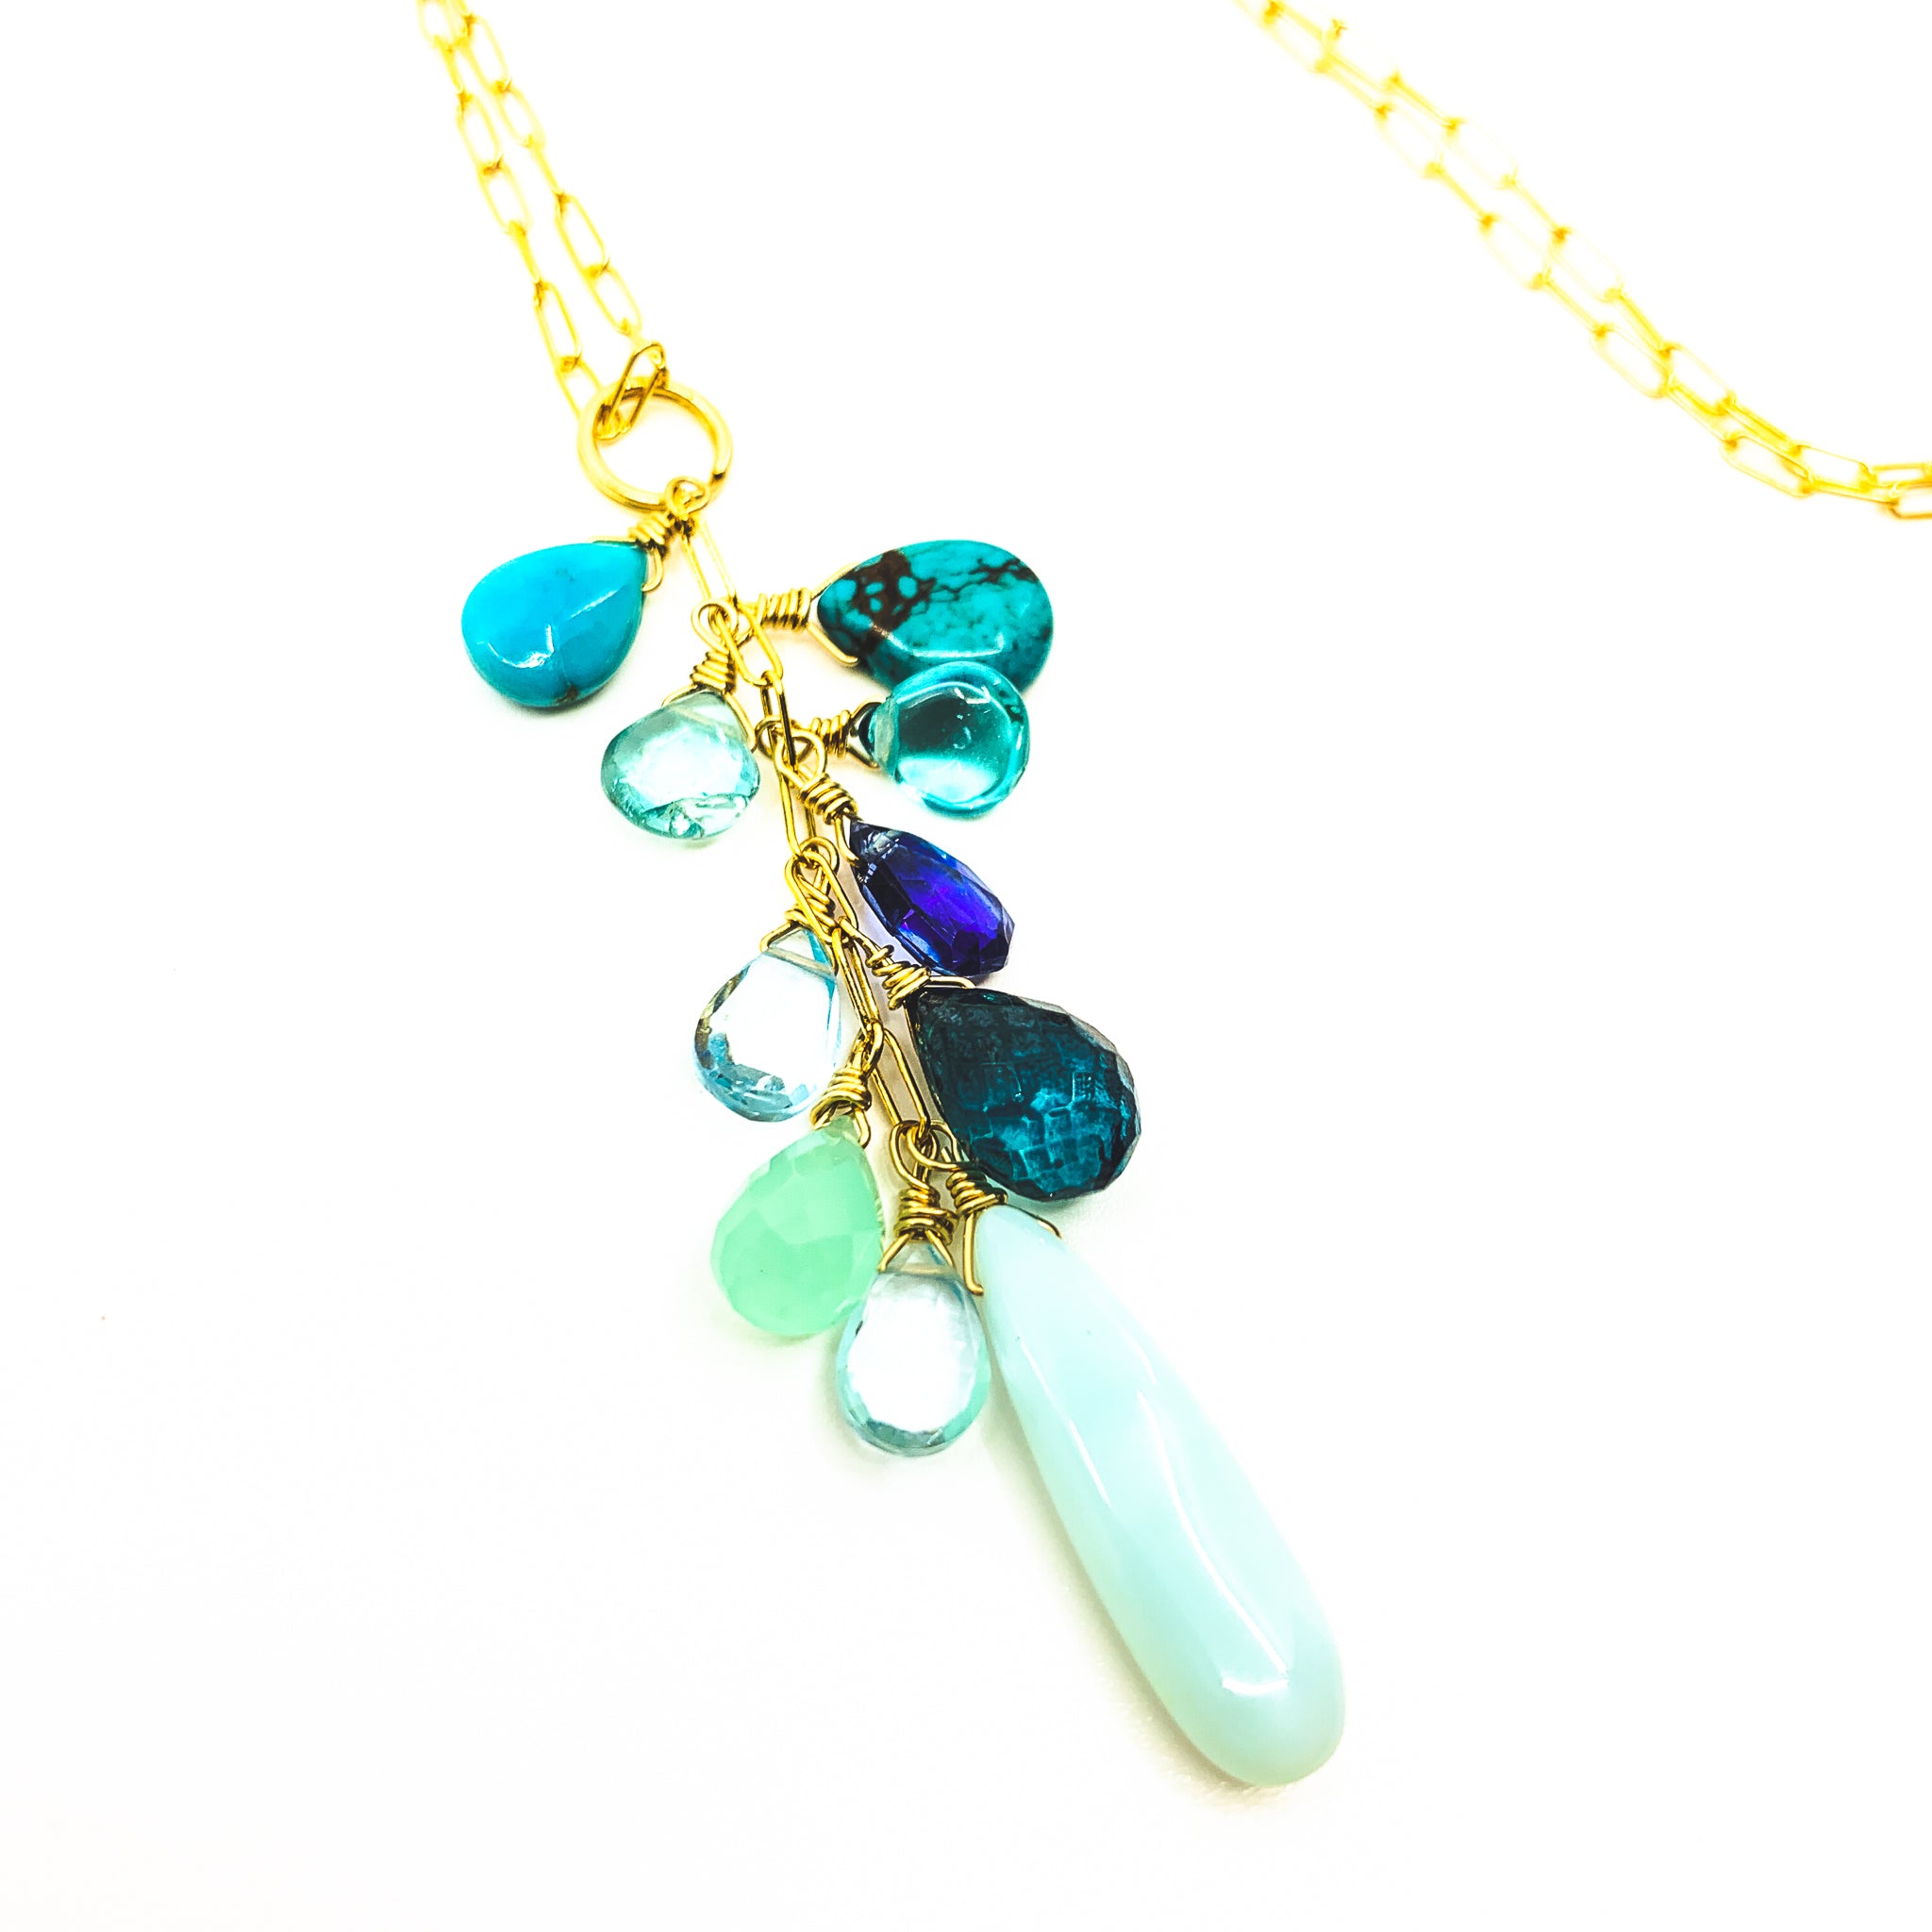 blue gemstones maui ocean necklace by eve black jewelry made in Hawaii